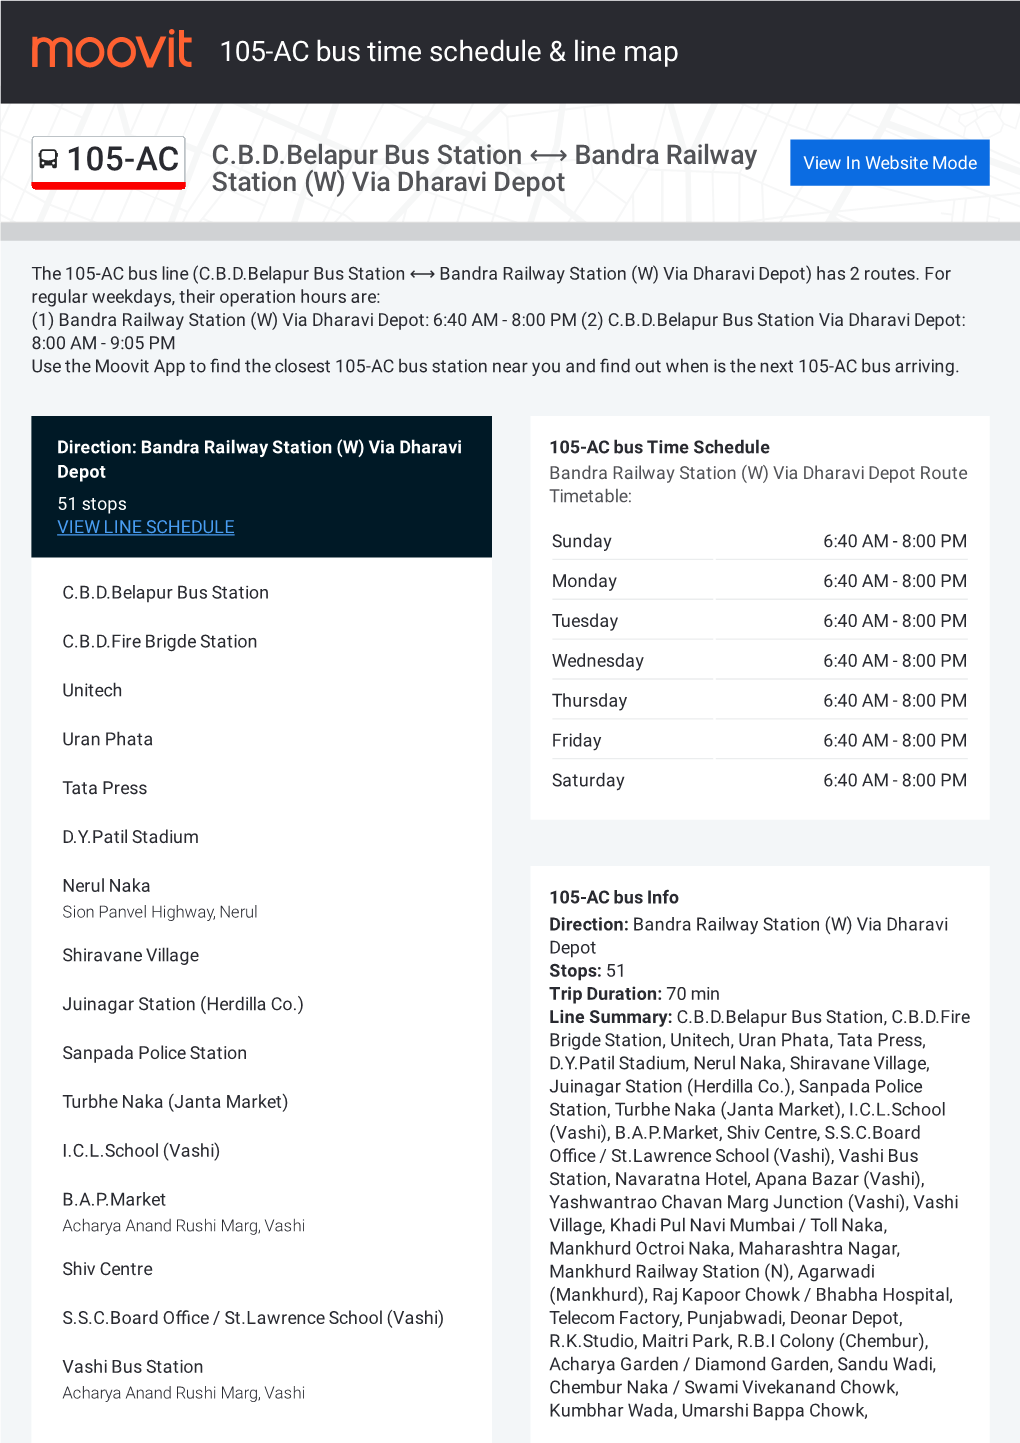 105-AC Bus Time Schedule & Line Route